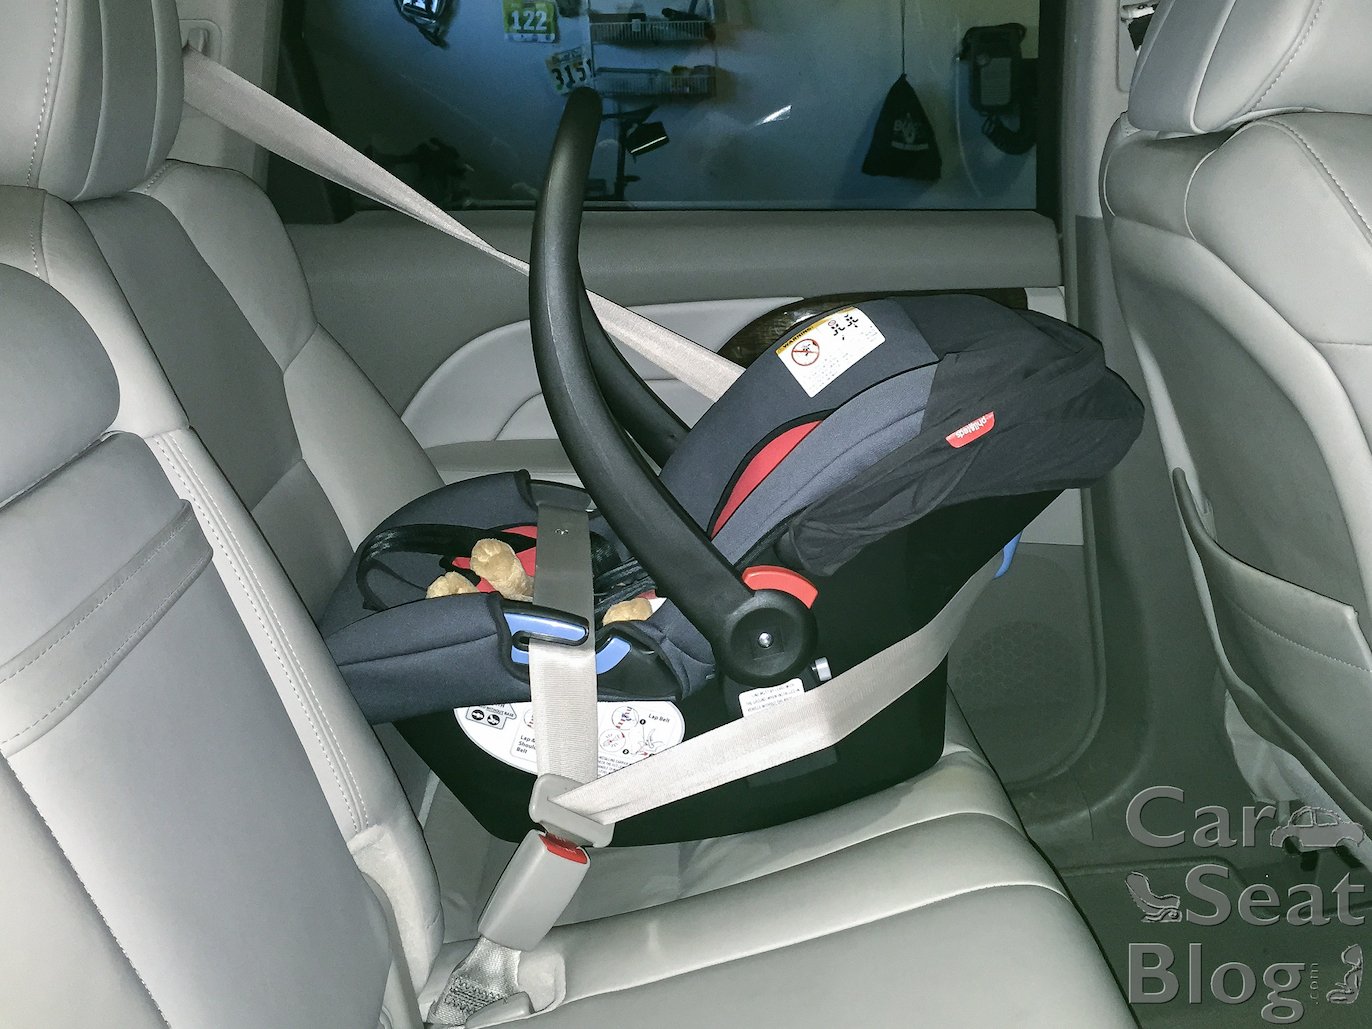 Nuna Pipa Car Seat Without Base, How To Install Infant Car Seat With Belt Without Base